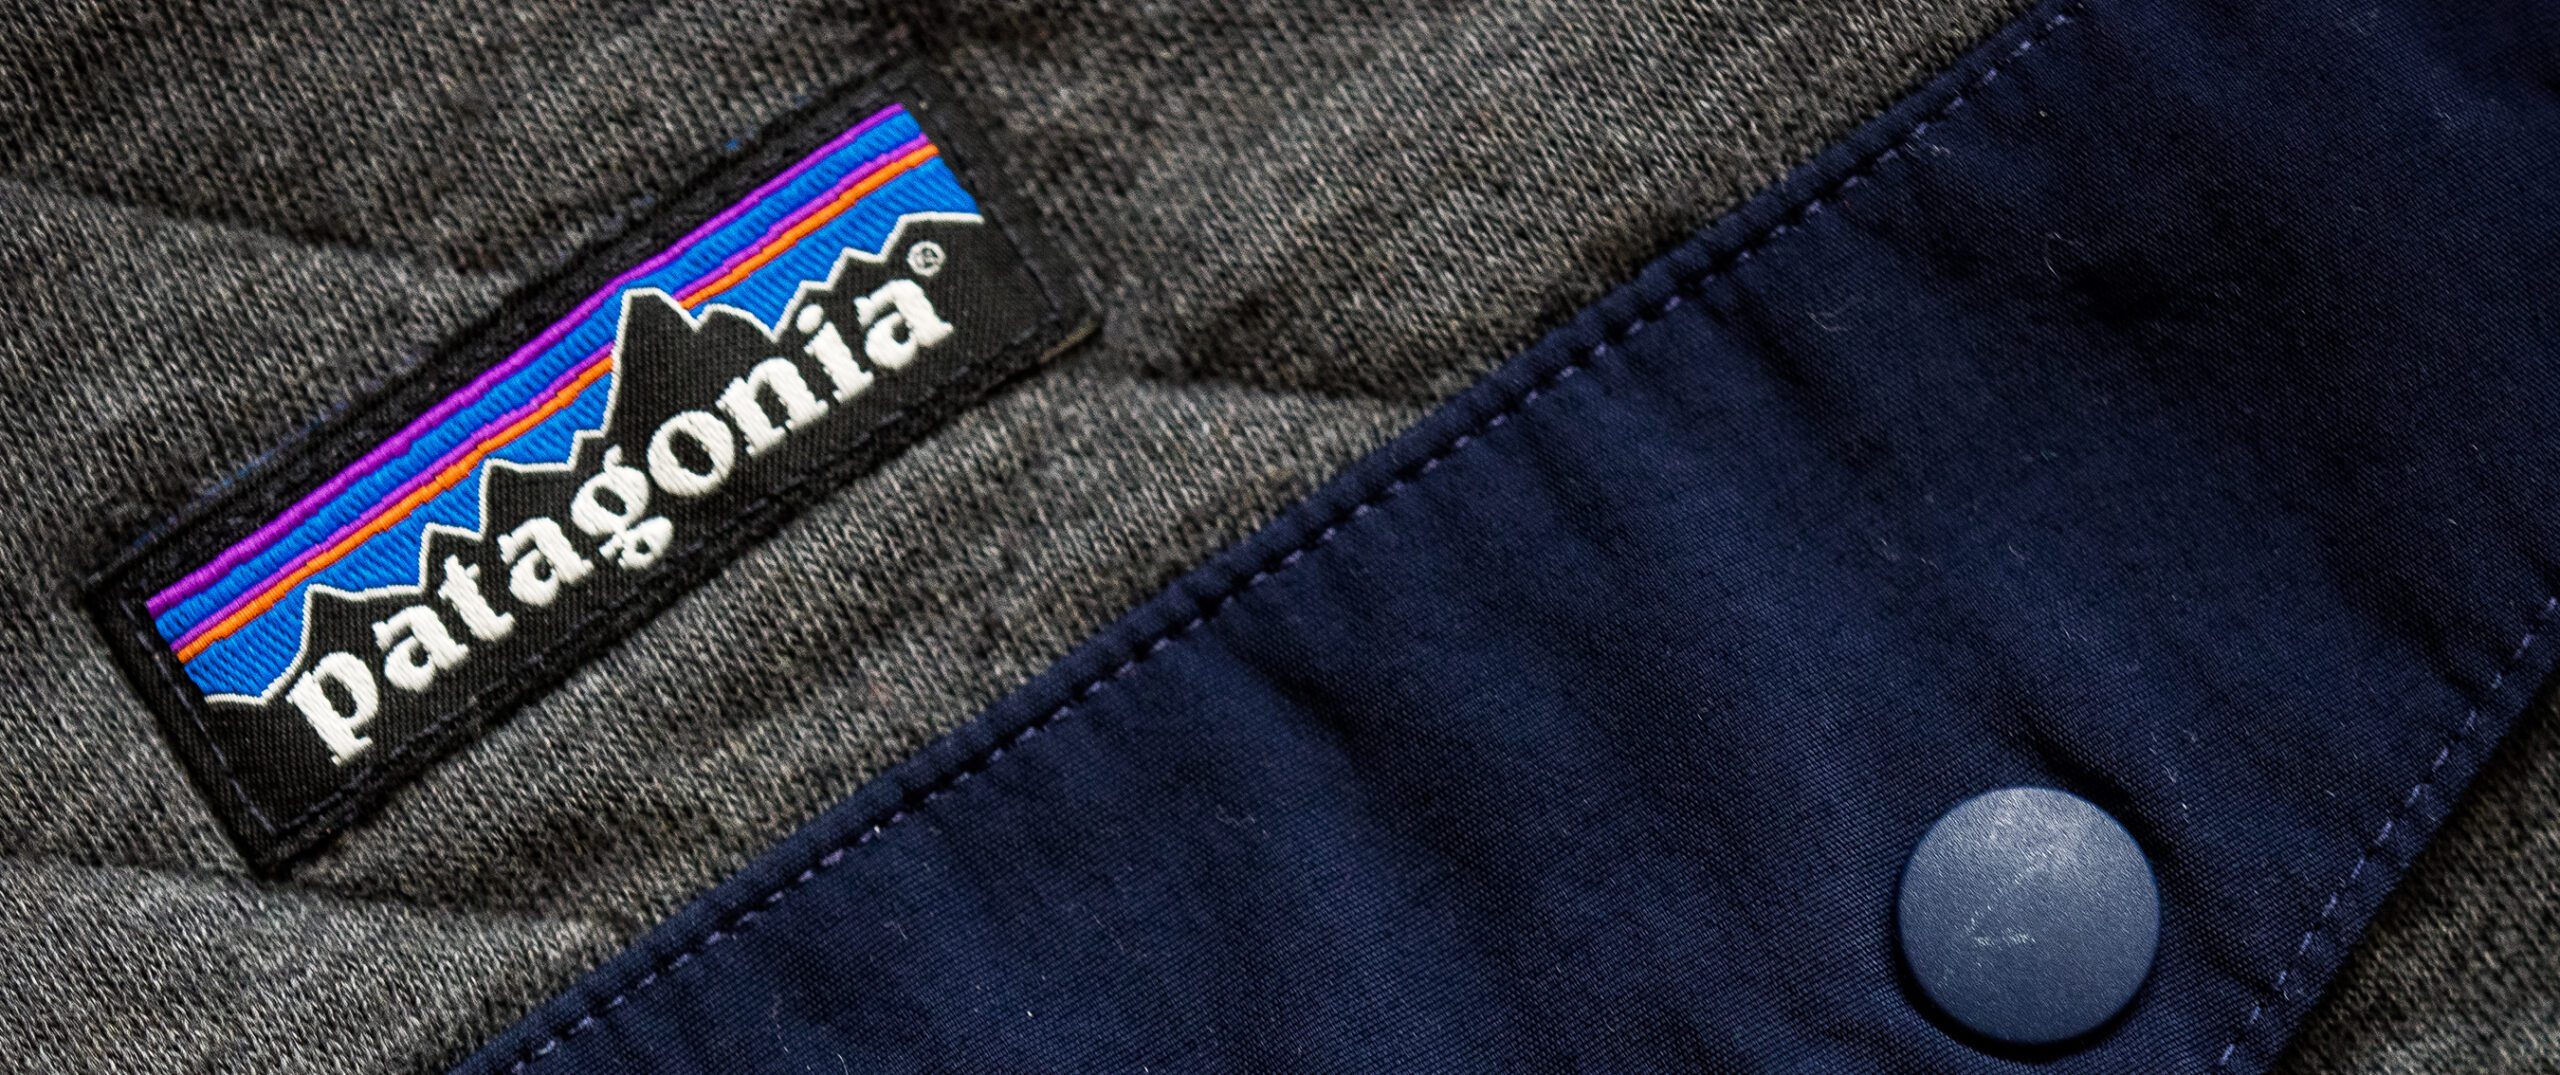 Patagonia: The business lessons to learn from the world's coolest